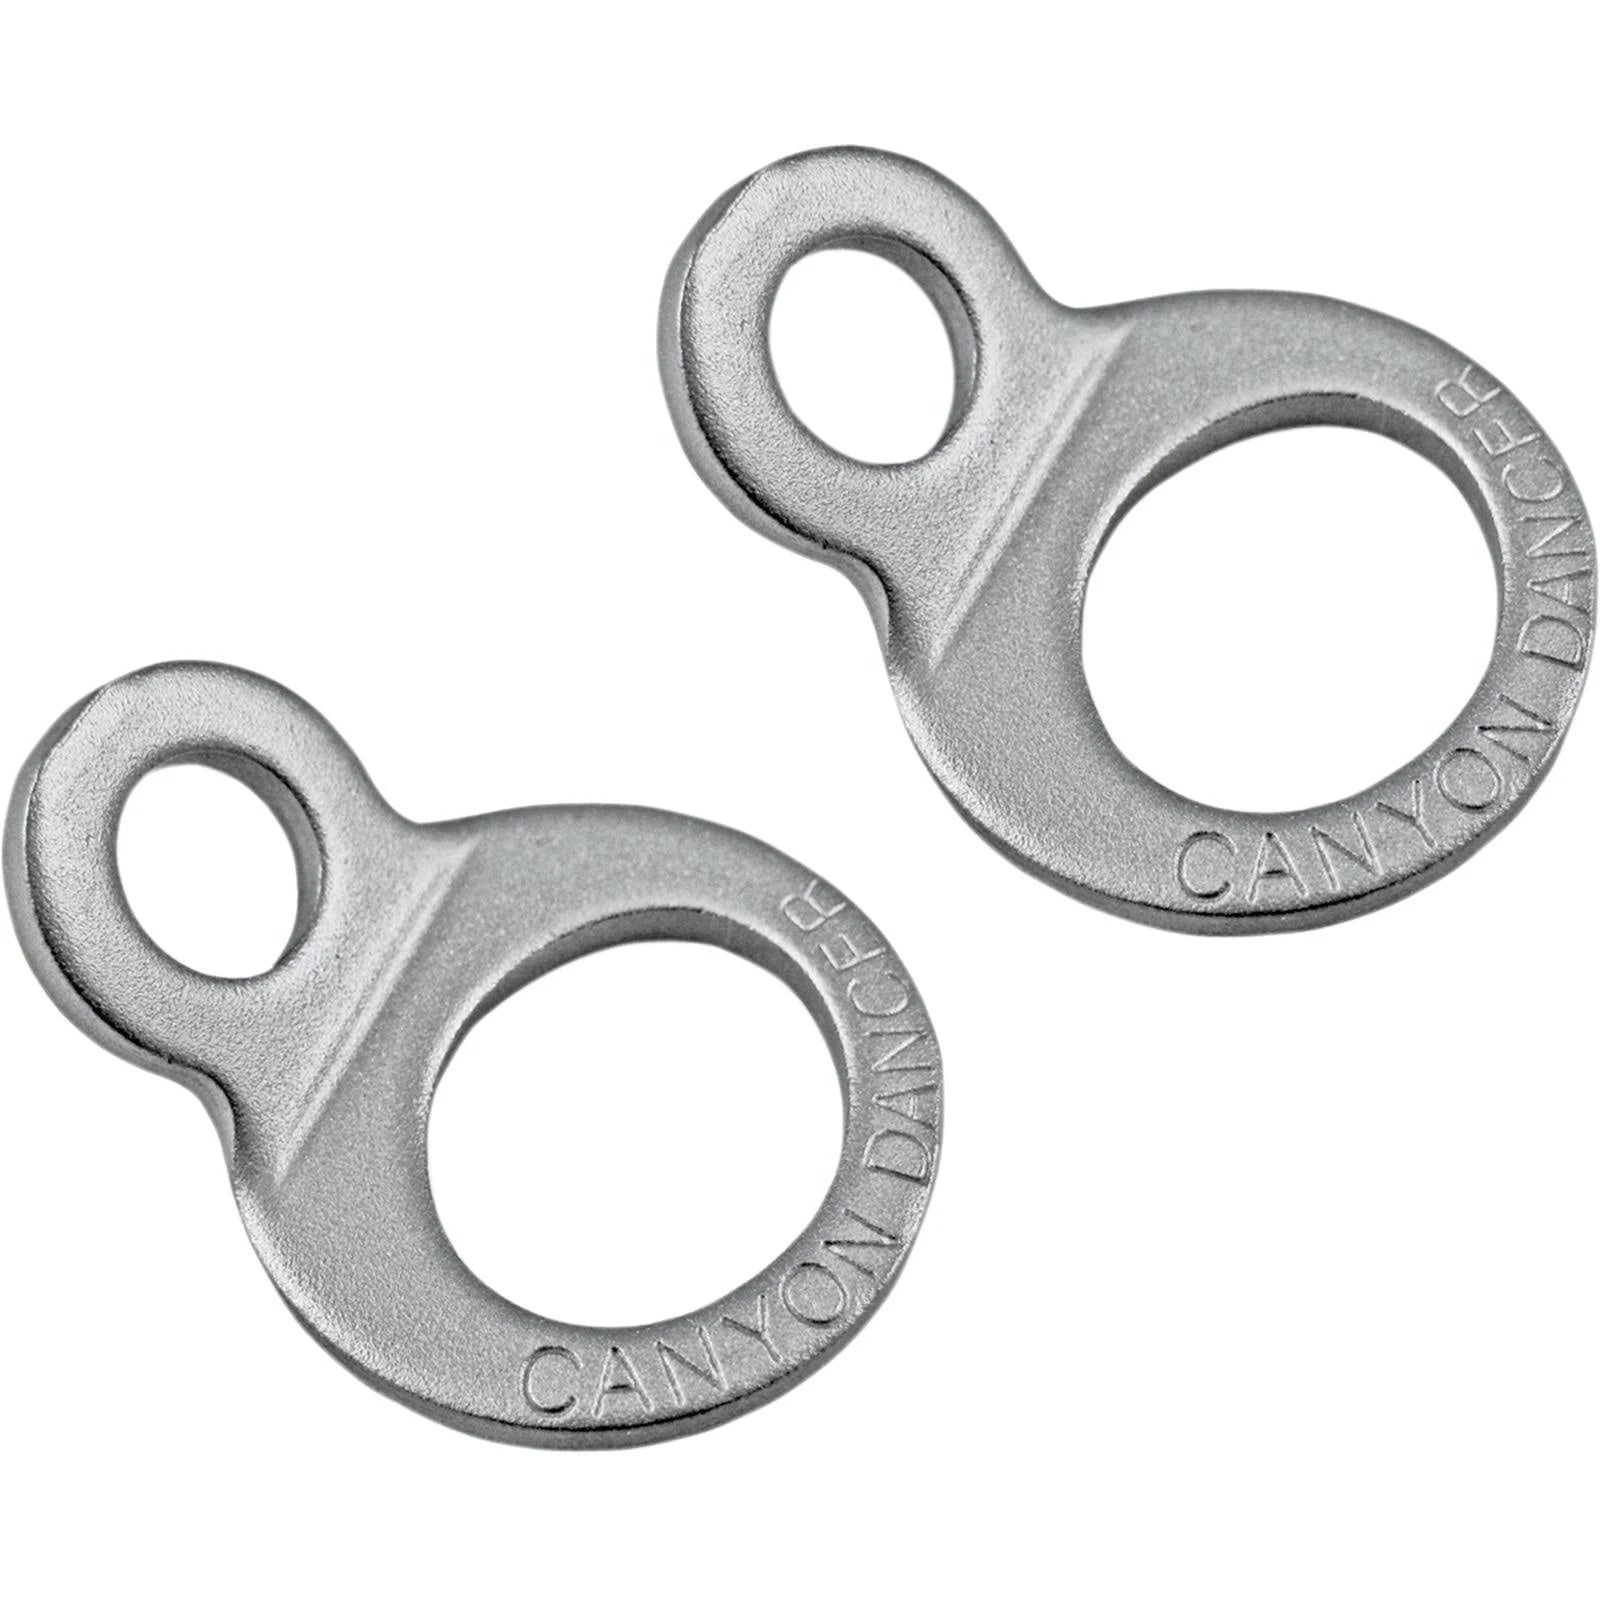 Tohuu Tie Down Anchor Steel Bolt-On Forged D Rings for Trucks Tie Down  Anchors for Truck Trailer Warehouse Boats Flush Mounting Plate Accessories  benefit - Walmart.com